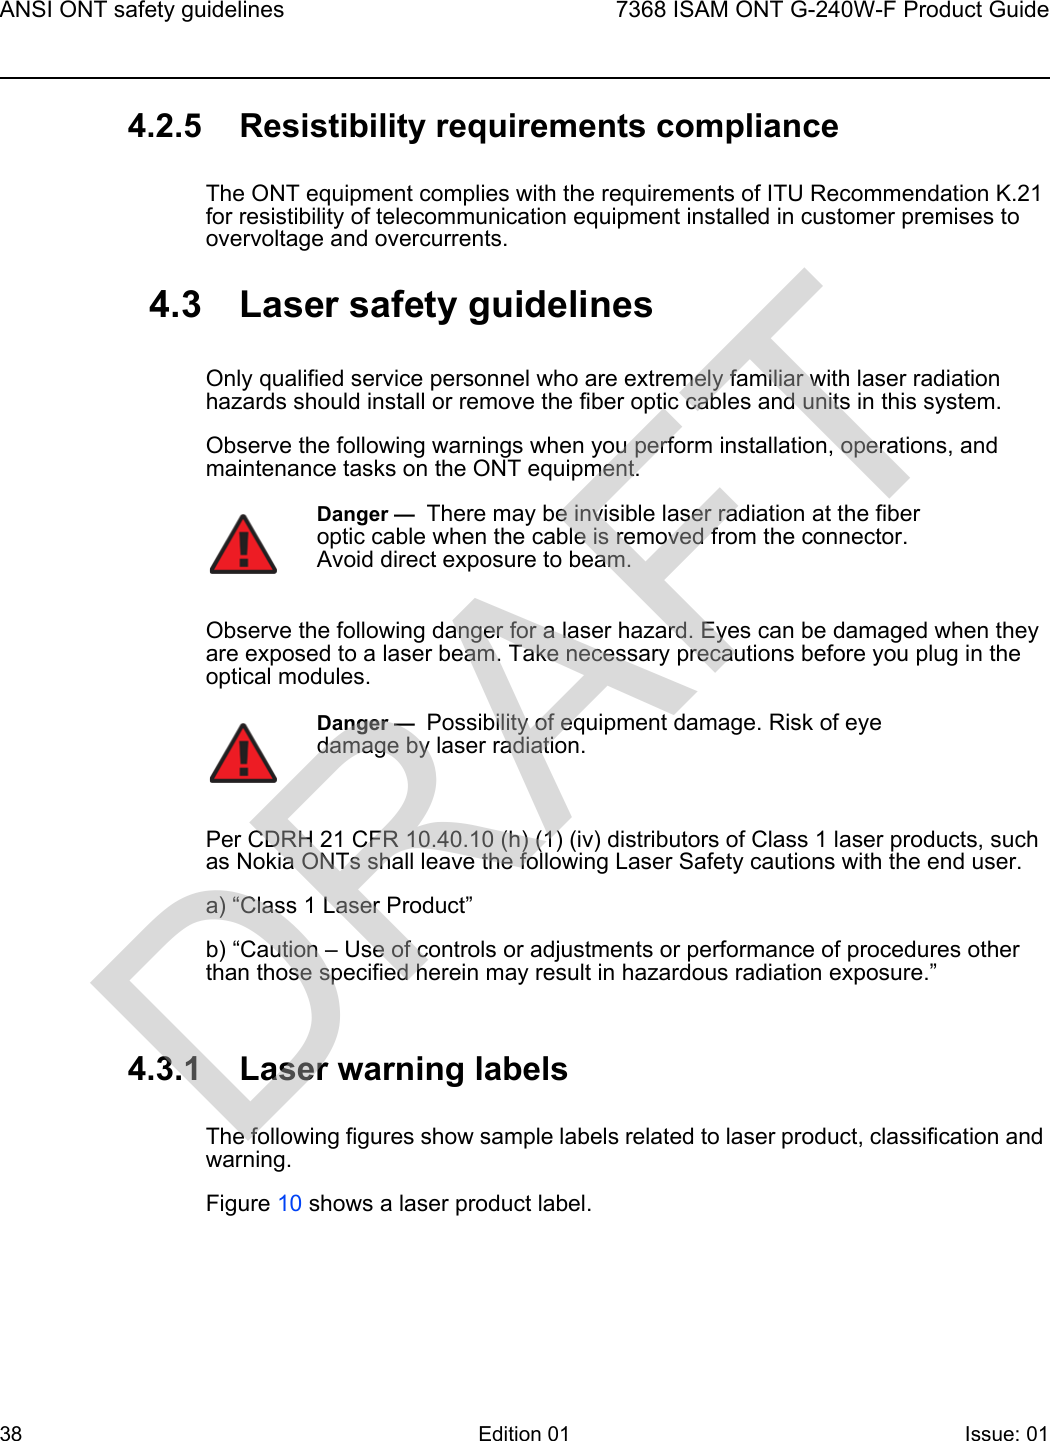 ANSI ONT safety guidelines387368 ISAM ONT G-240W-F Product GuideEdition 01 Issue: 01 4.2.5 Resistibility requirements complianceThe ONT equipment complies with the requirements of ITU Recommendation K.21 for resistibility of telecommunication equipment installed in customer premises to overvoltage and overcurrents.4.3 Laser safety guidelinesOnly qualified service personnel who are extremely familiar with laser radiation hazards should install or remove the fiber optic cables and units in this system.Observe the following warnings when you perform installation, operations, and maintenance tasks on the ONT equipment.Observe the following danger for a laser hazard. Eyes can be damaged when they are exposed to a laser beam. Take necessary precautions before you plug in the optical modules.Per CDRH 21 CFR 10.40.10 (h) (1) (iv) distributors of Class 1 laser products, such as Nokia ONTs shall leave the following Laser Safety cautions with the end user.a) “Class 1 Laser Product”b) “Caution – Use of controls or adjustments or performance of procedures other than those specified herein may result in hazardous radiation exposure.”4.3.1 Laser warning labelsThe following figures show sample labels related to laser product, classification and warning. Figure 10 shows a laser product label.Danger —  There may be invisible laser radiation at the fiber optic cable when the cable is removed from the connector. Avoid direct exposure to beam.Danger —  Possibility of equipment damage. Risk of eye damage by laser radiation.DRAFT